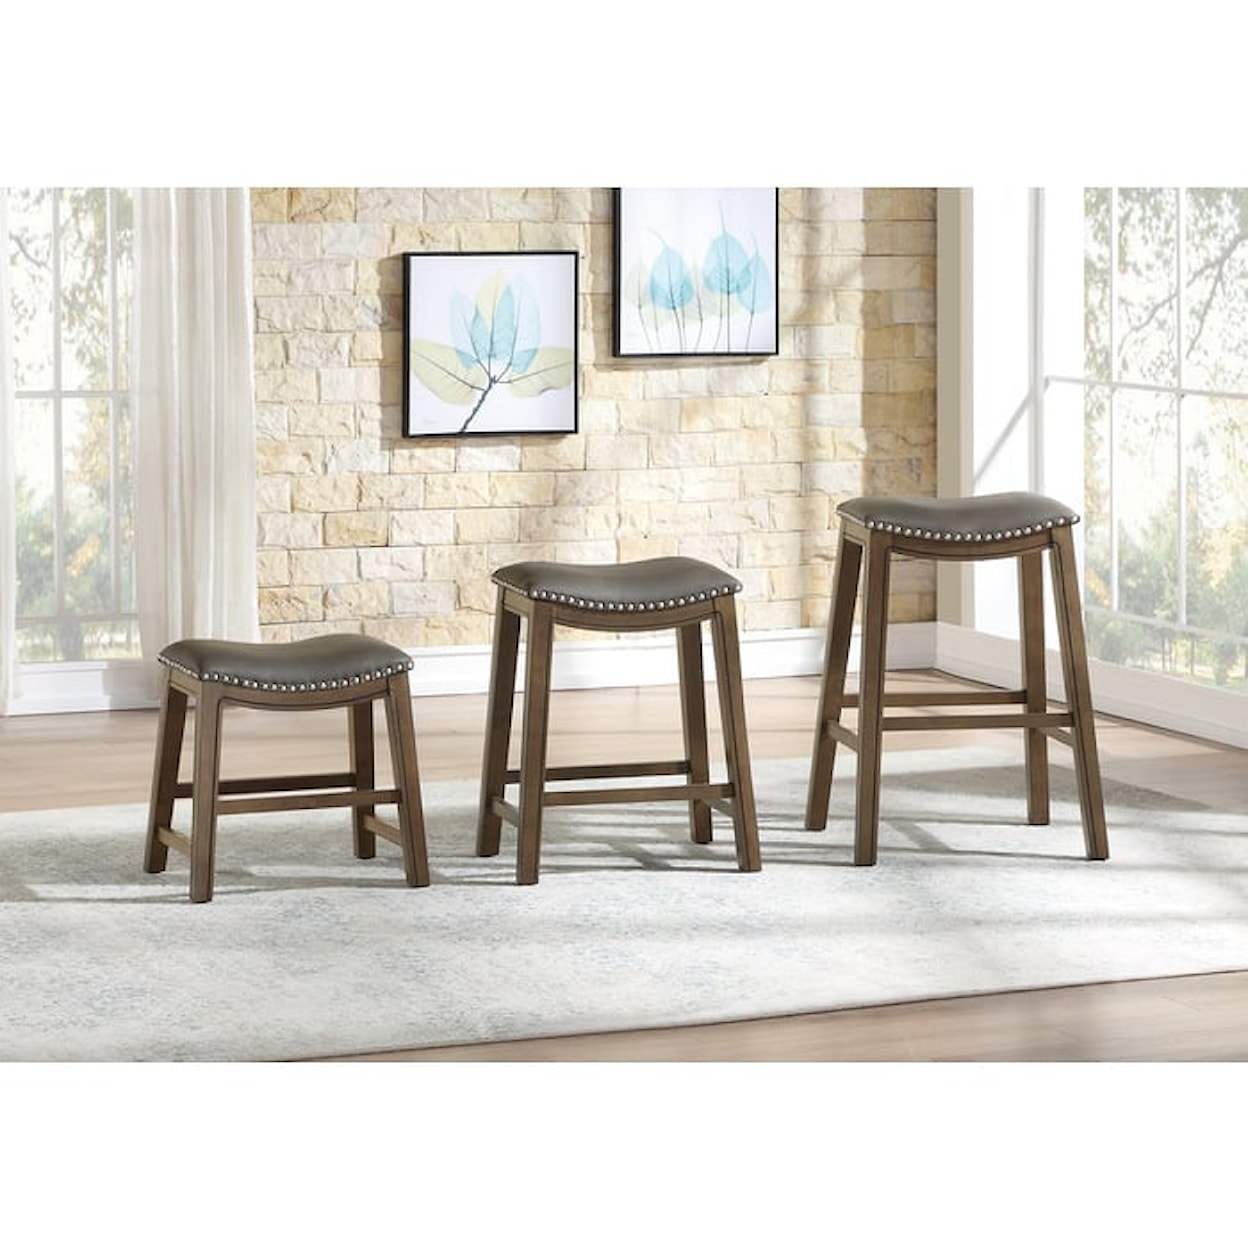 Homelegance Ordway 24 Counter Height Stool, Gray